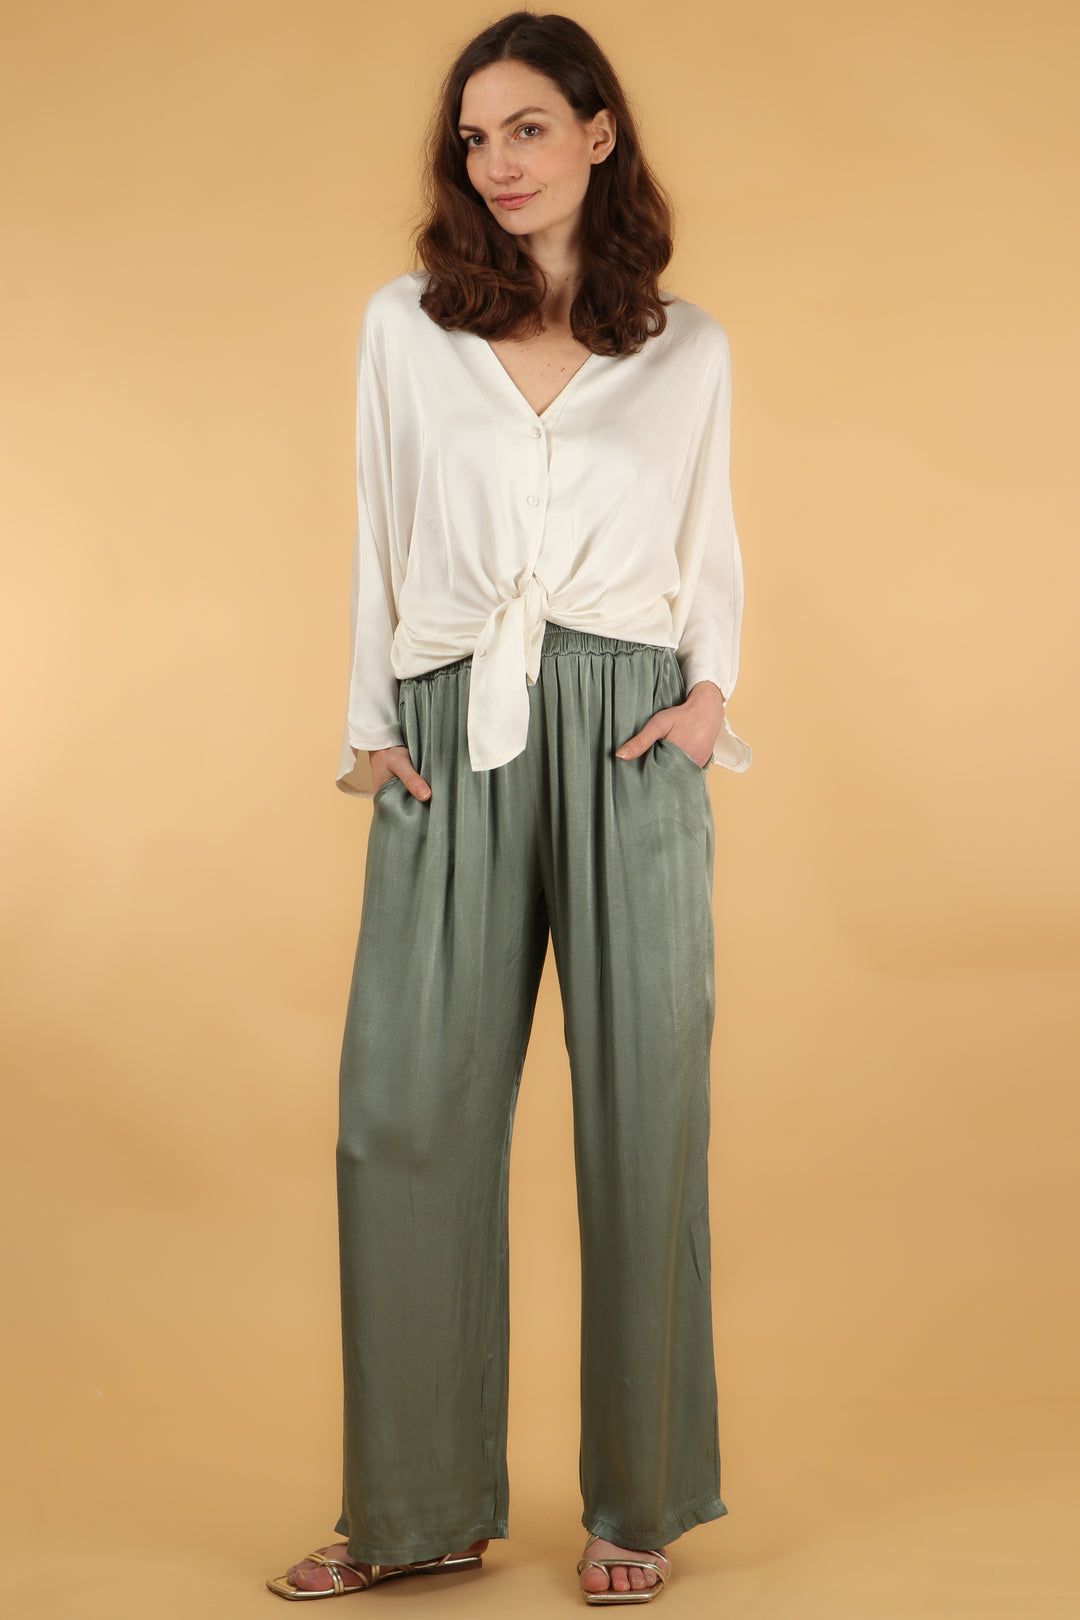 model wearing a pair of plain sage green wide leg trousers with pockets